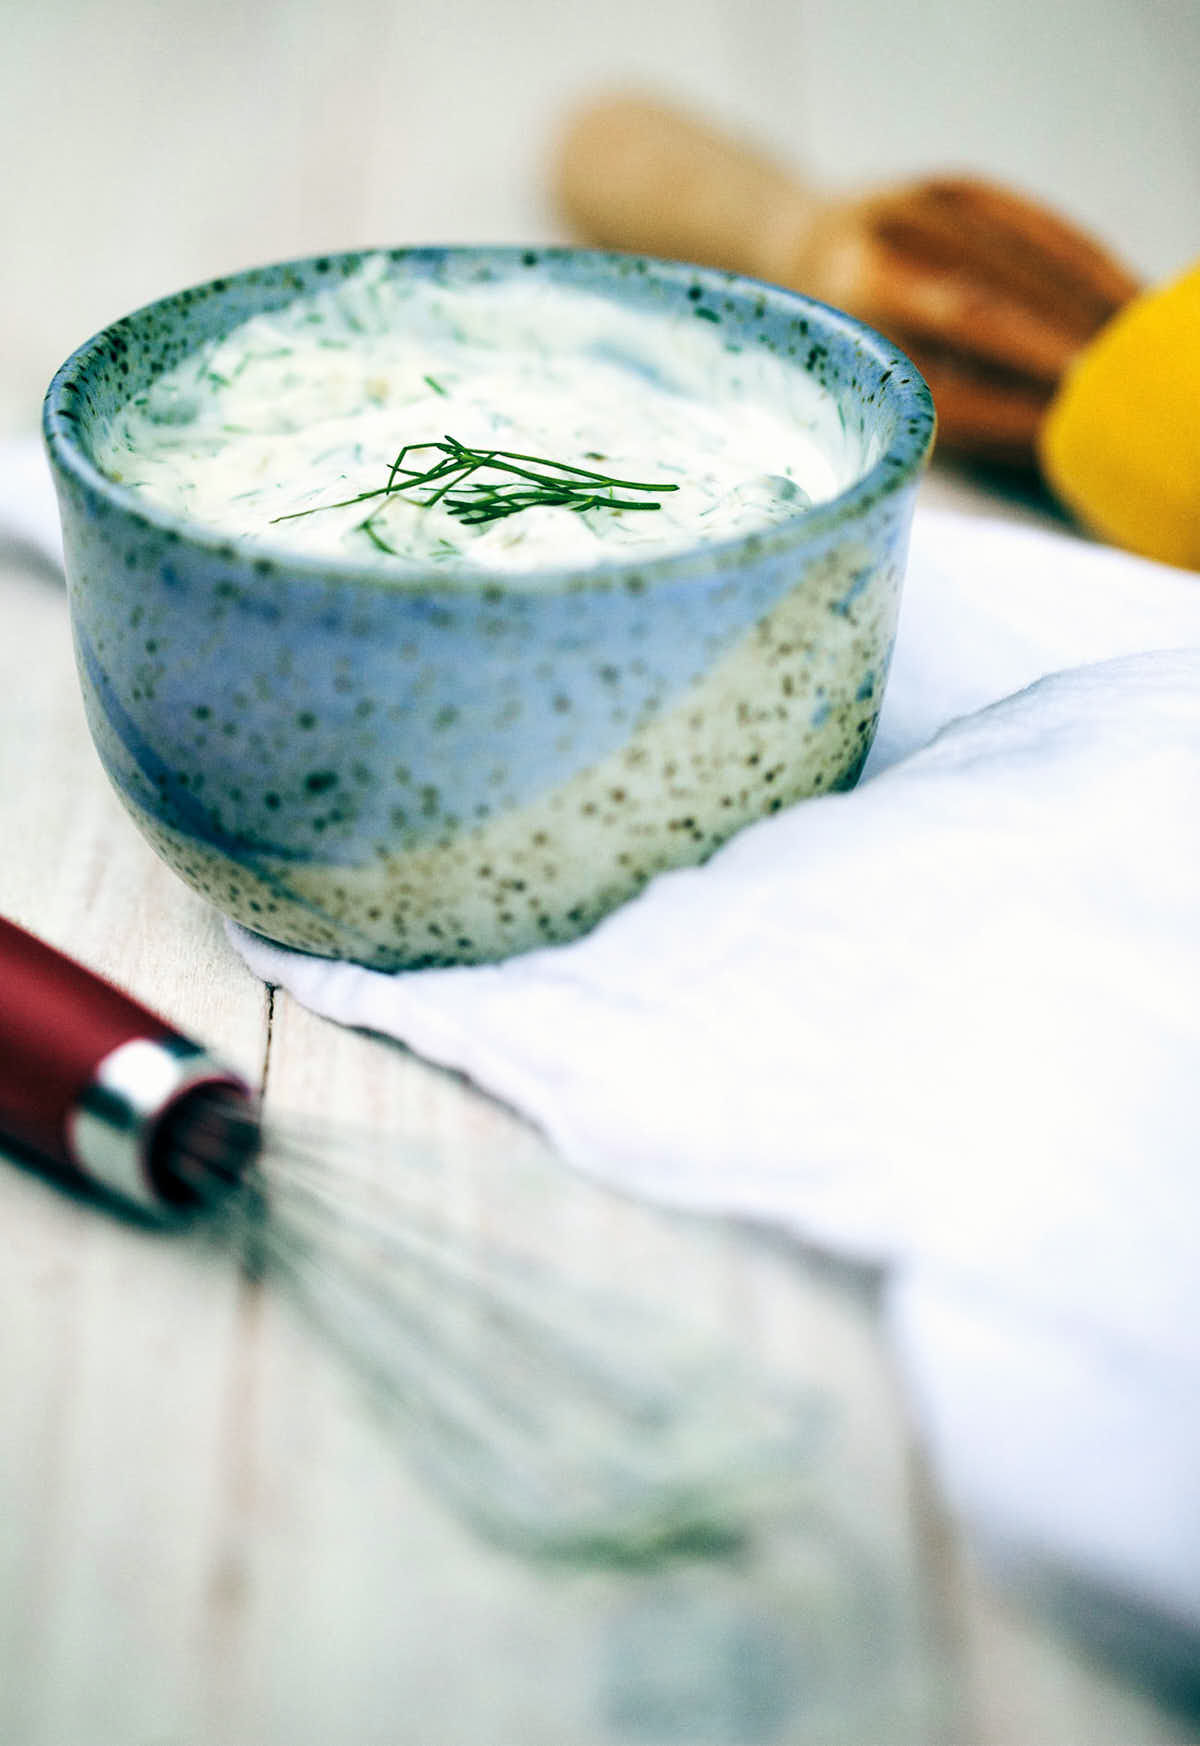 Yogurt and dill sauce topped with fresh dill